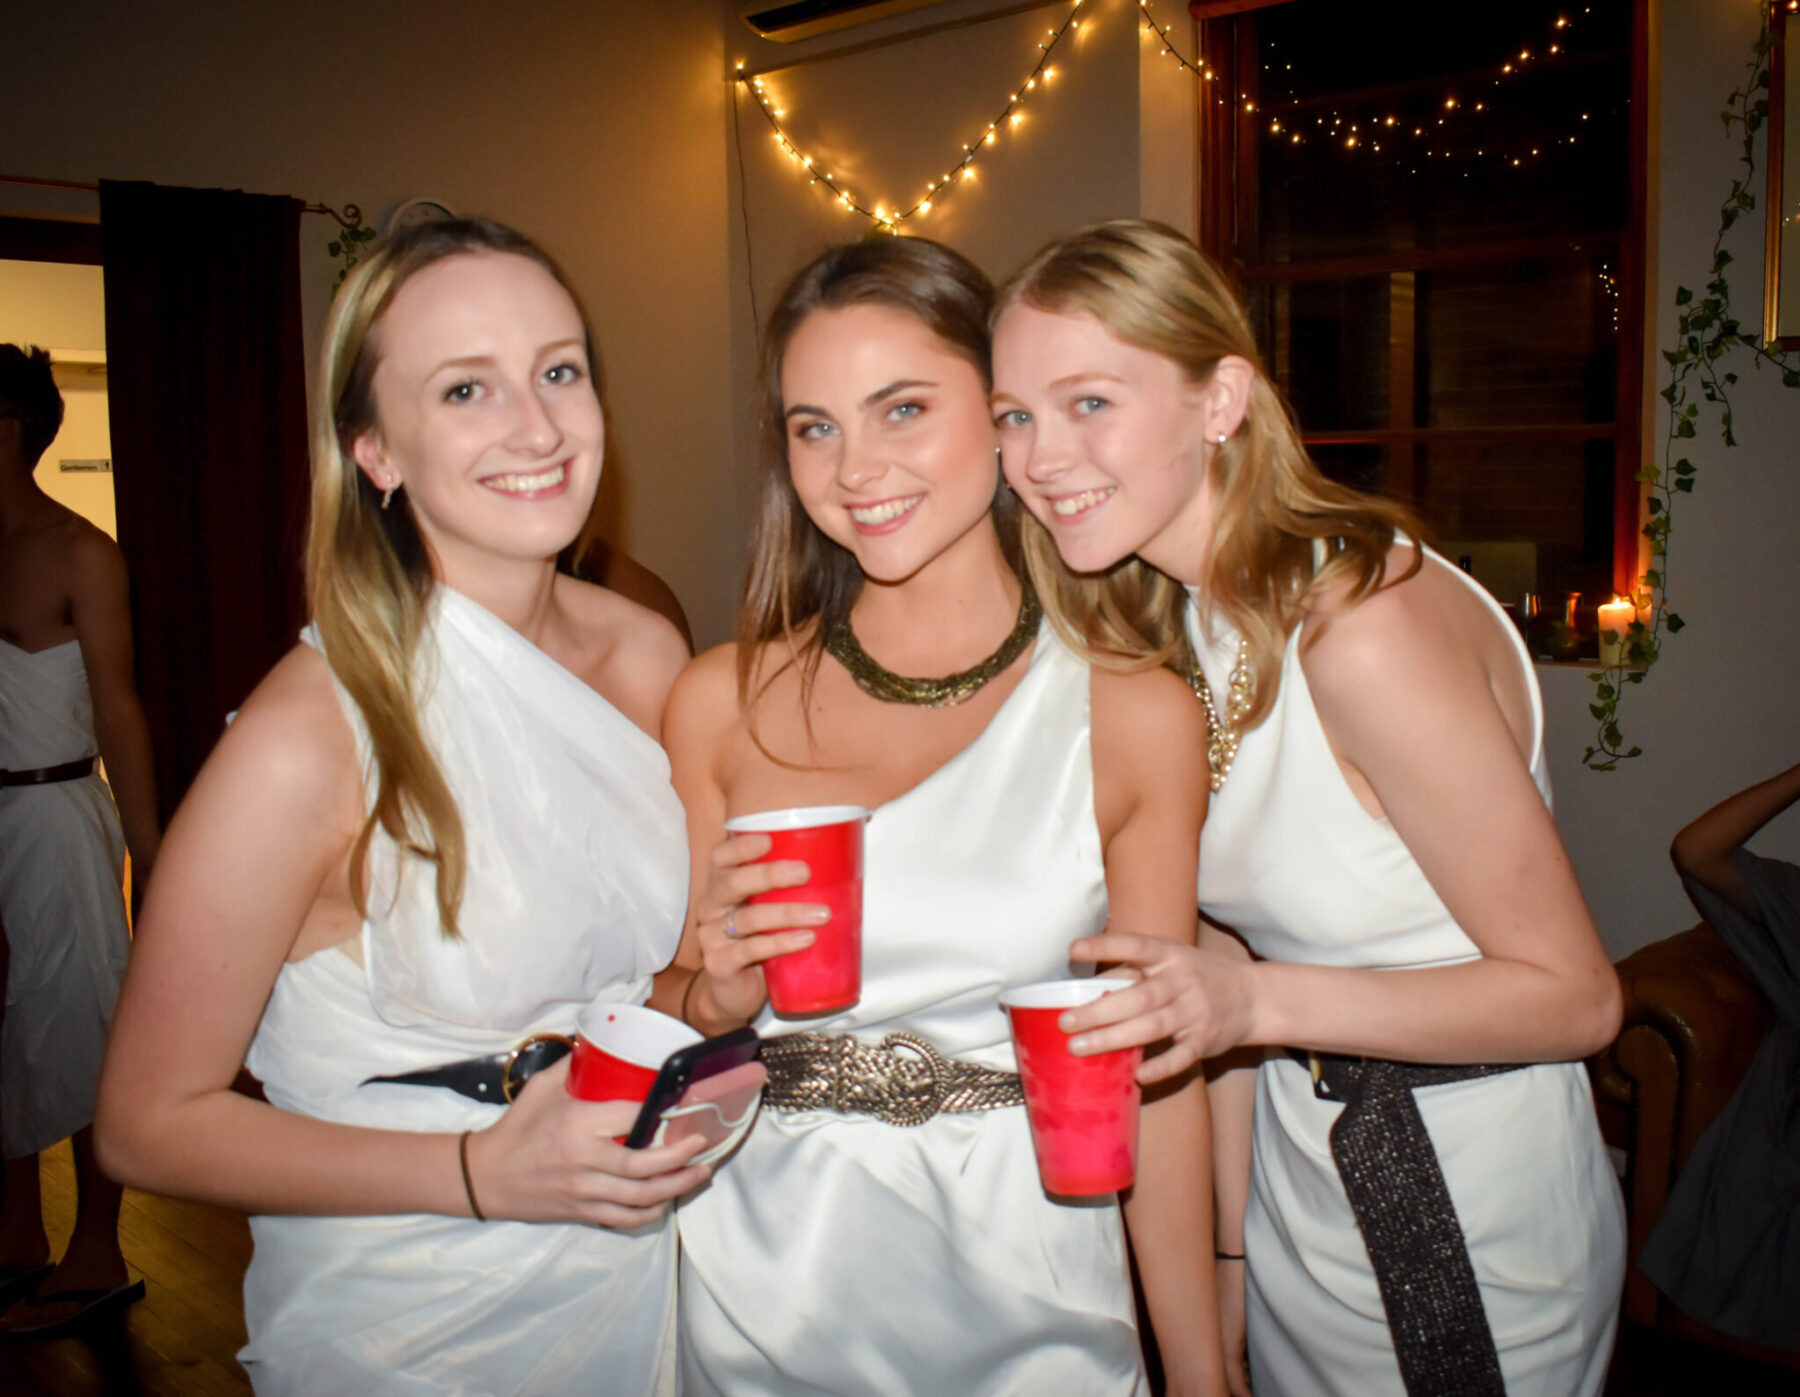 Classics-Week-Toga-Party-2021-Edited-5-scaled-1. Campion College Australia.